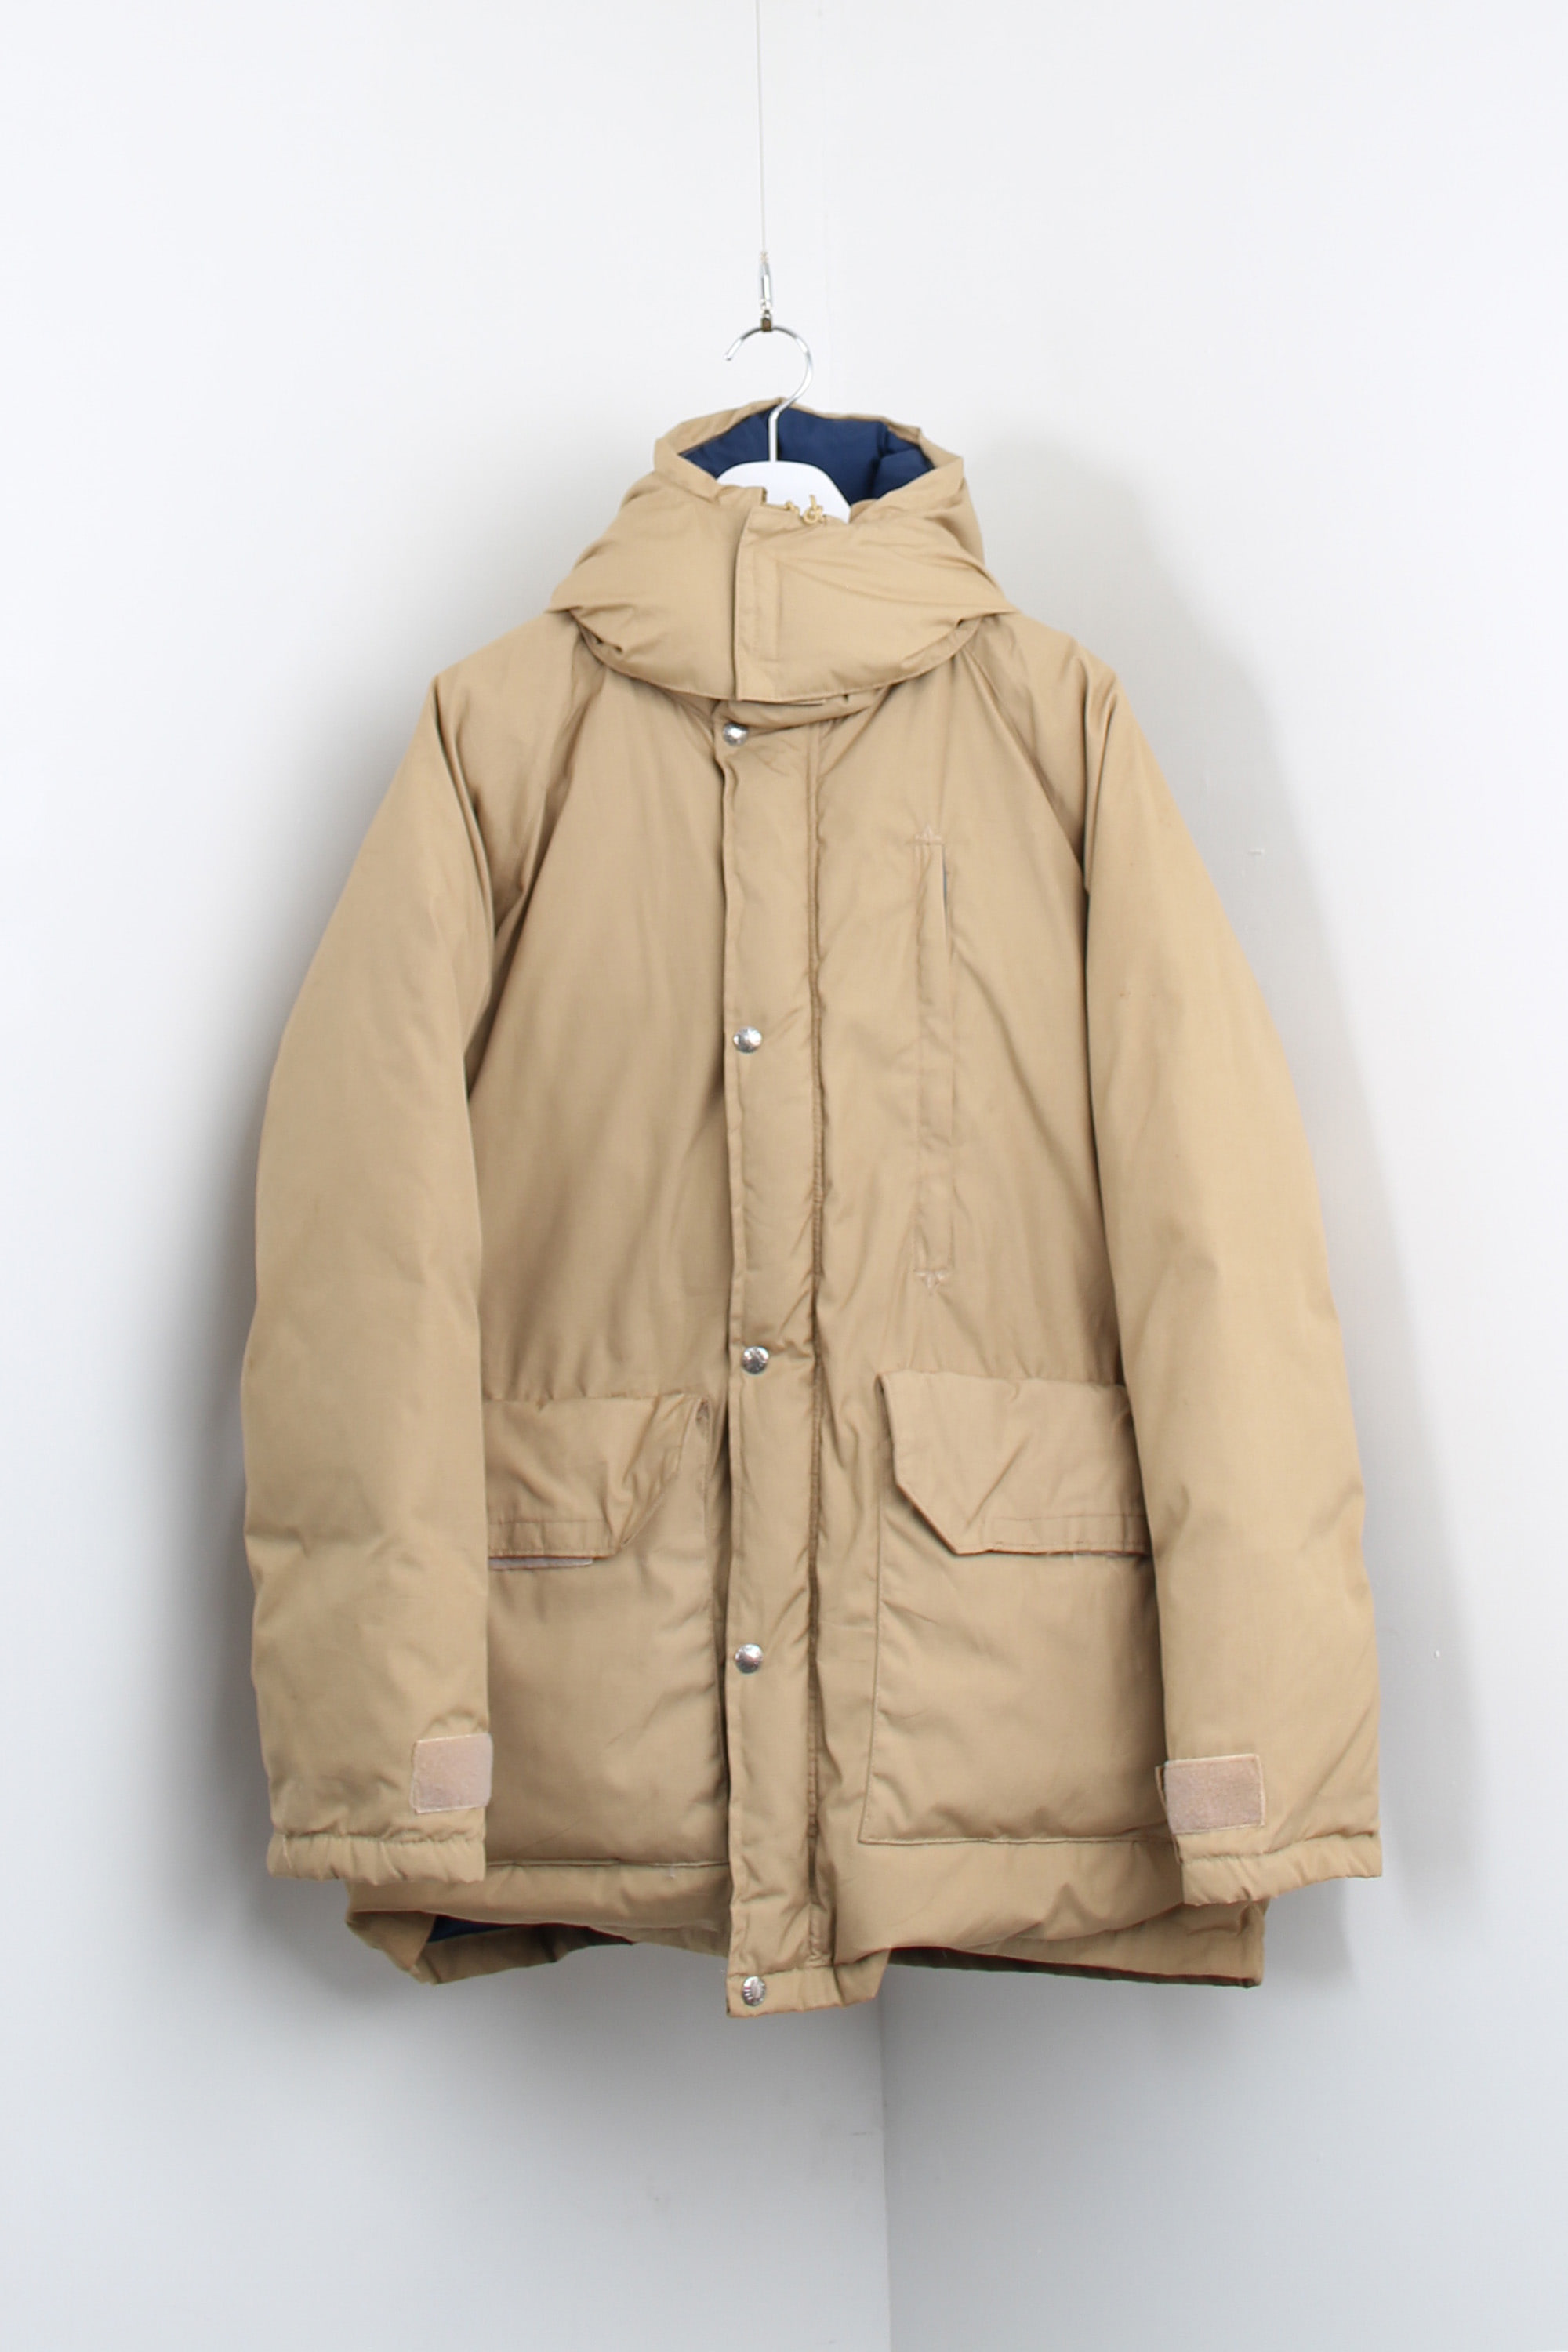 vintage the north face puffer jacket